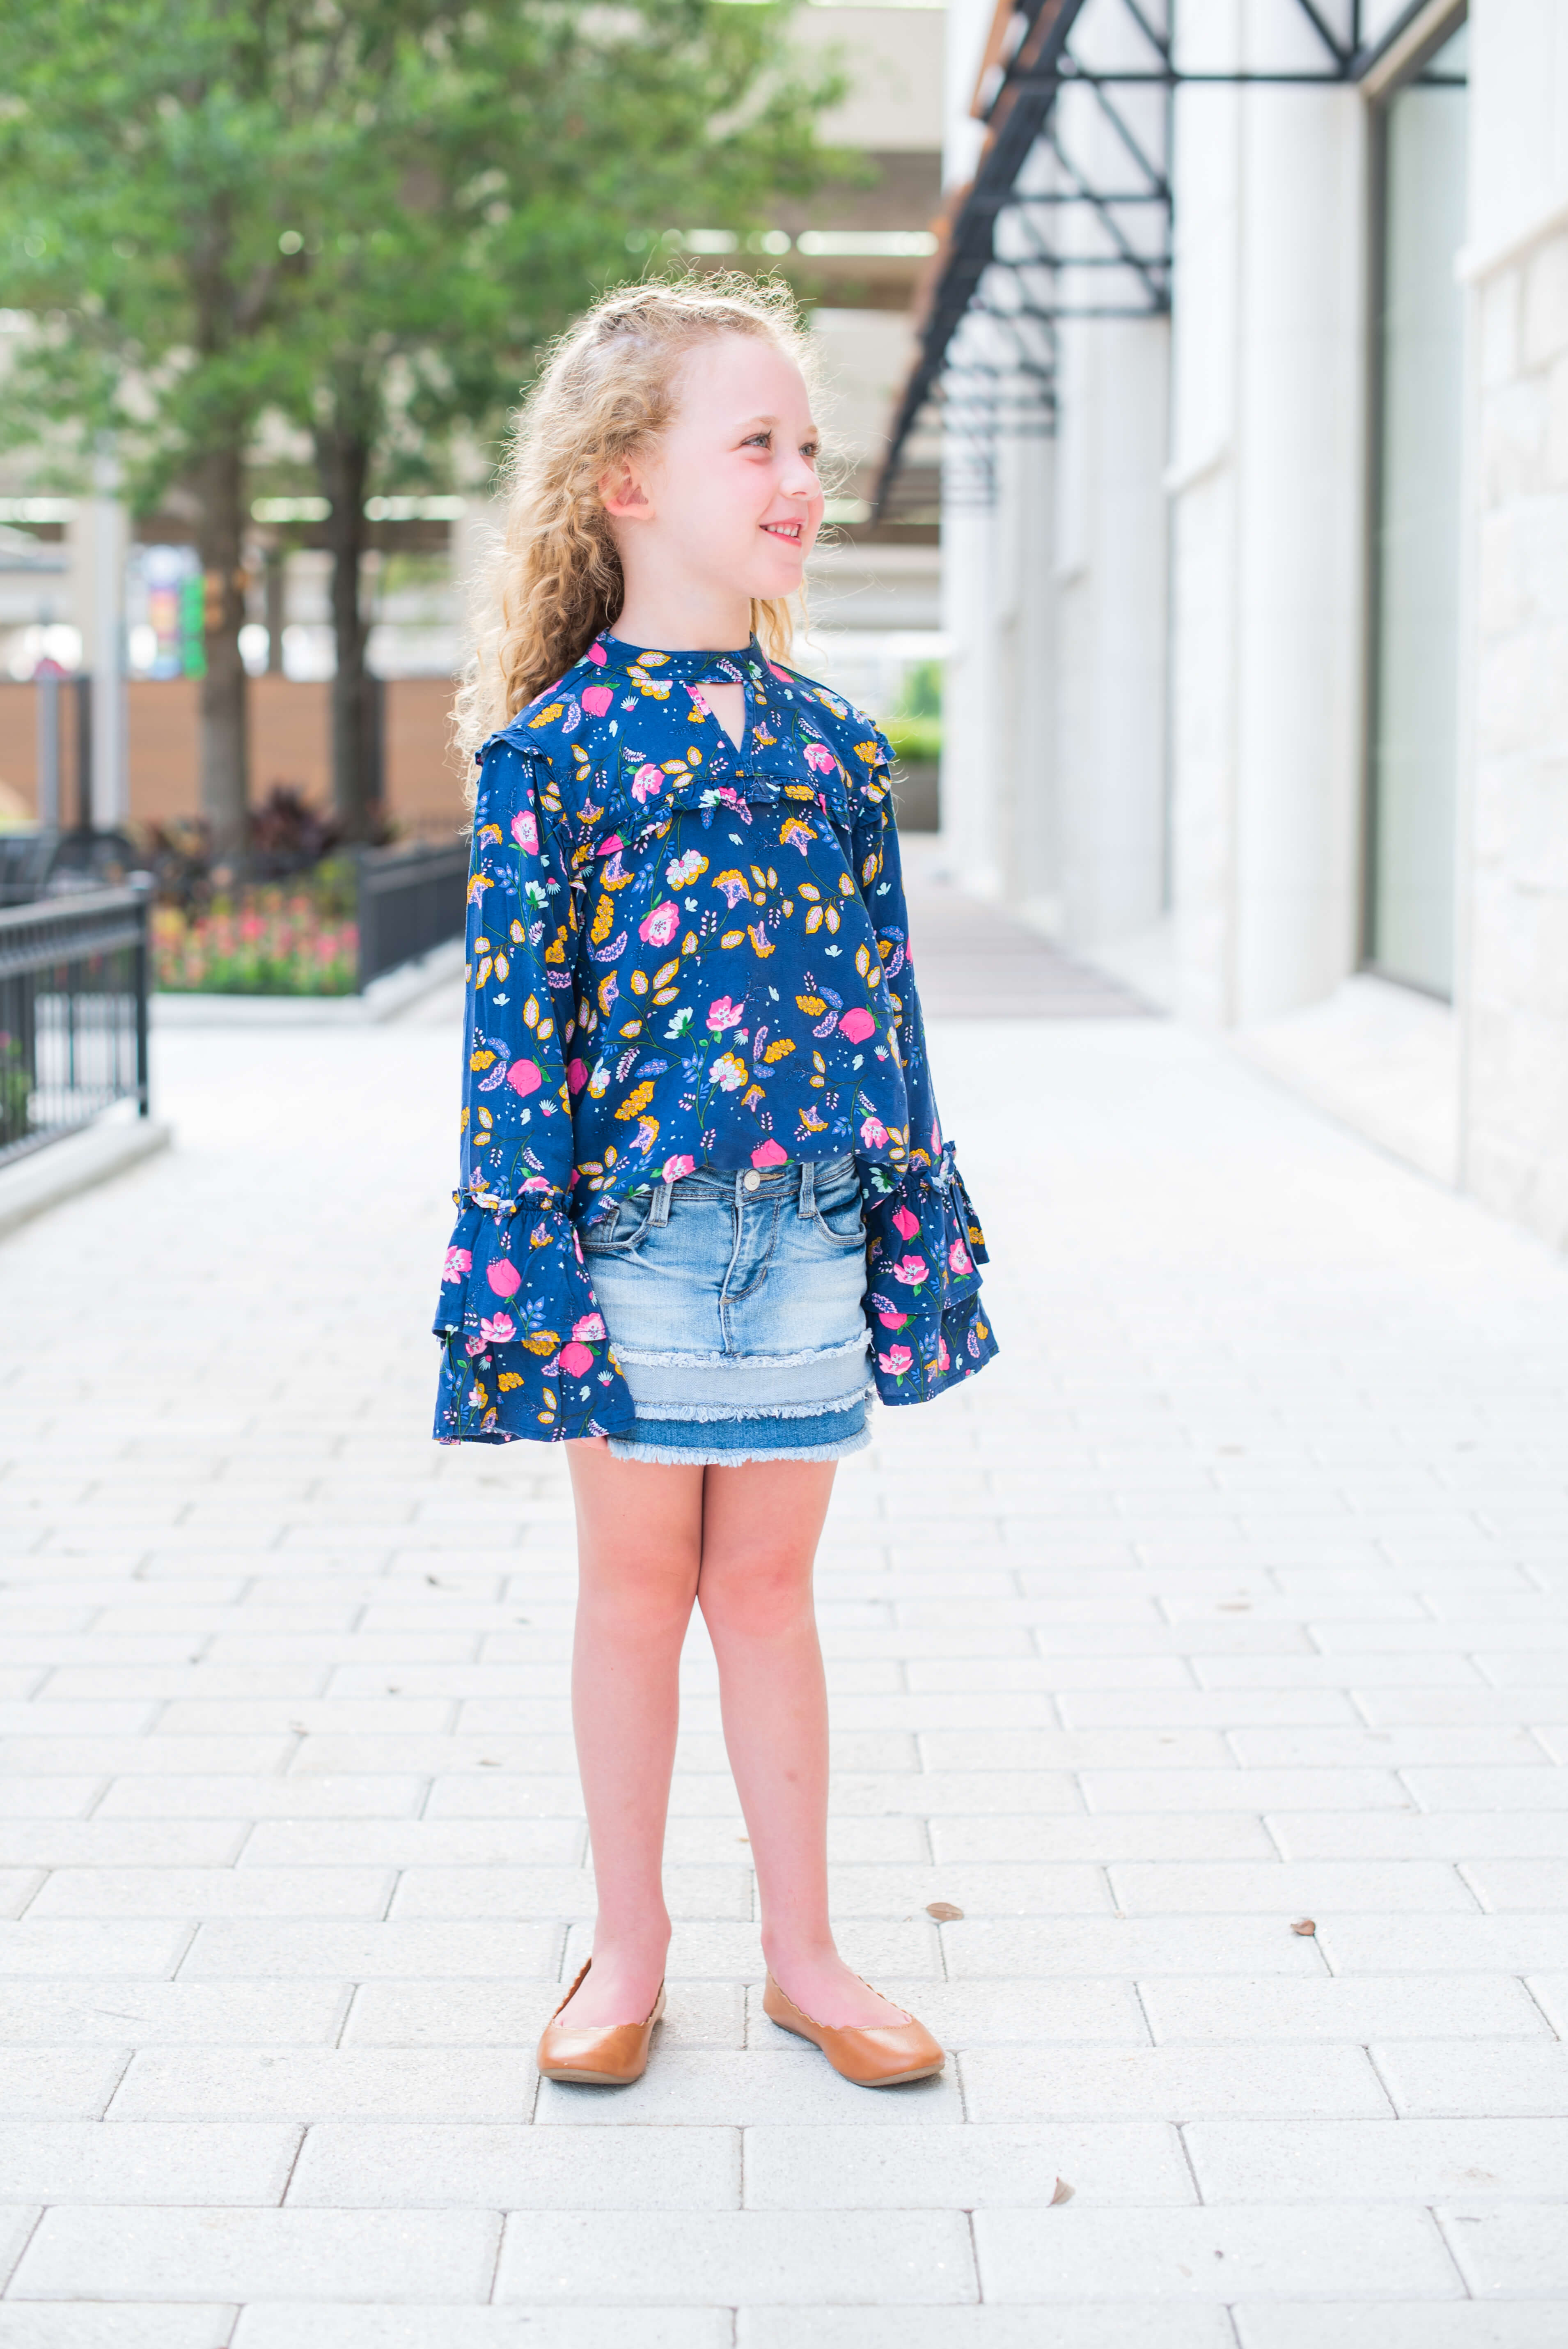 What to wear on the first day of kindergarten - My Baby is Going to Kindergarten | Back to School Outfits With JcPenney featured by popular Dallas fashion blogger Style Your Senses